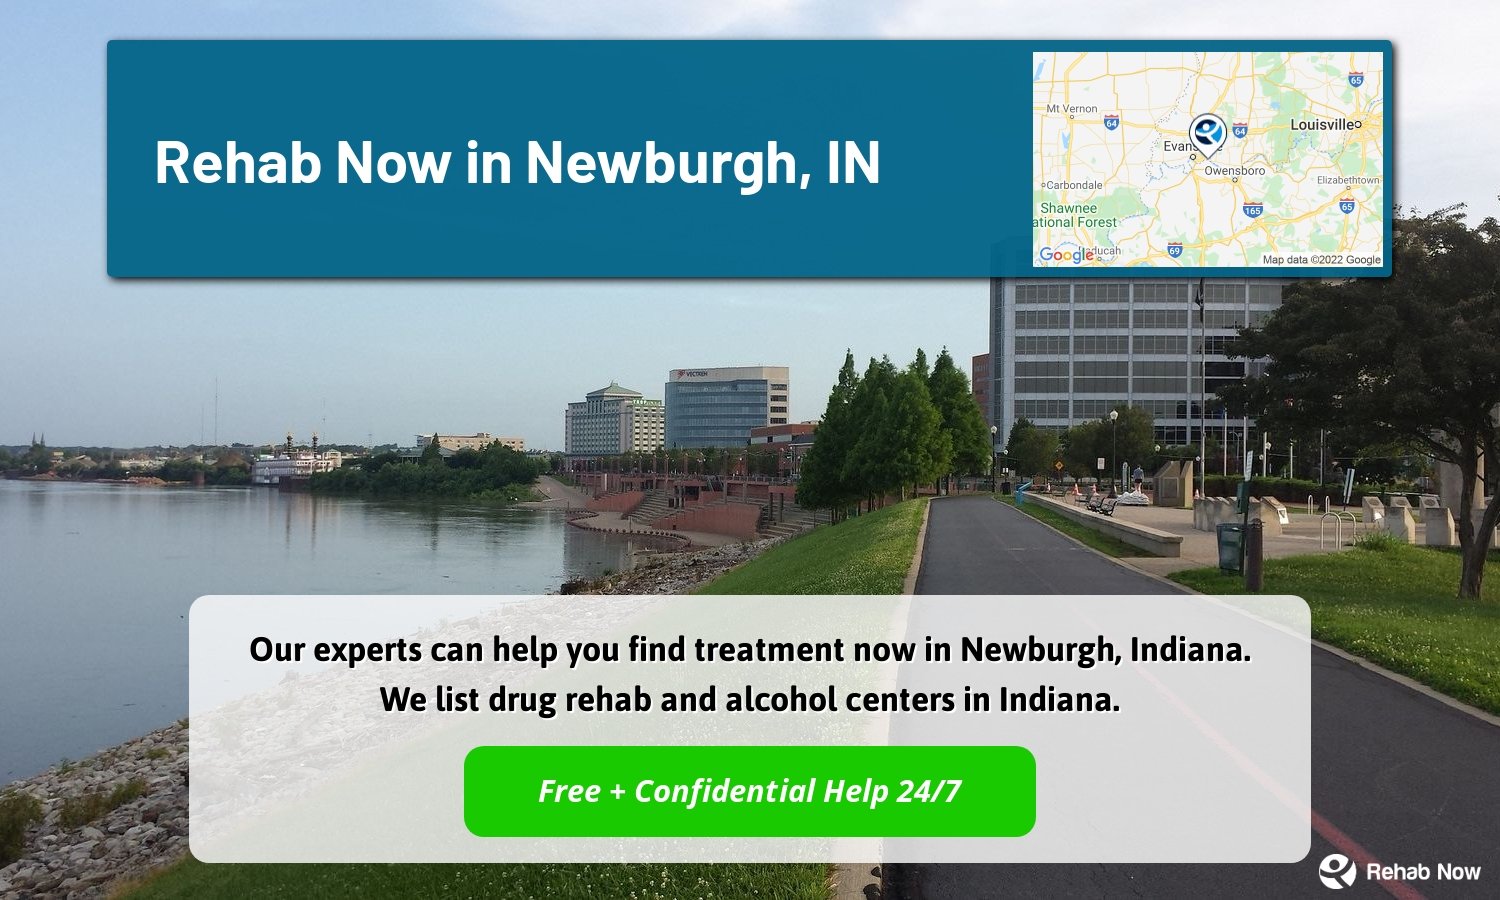 Our experts can help you find treatment now in Newburgh, Indiana. We list drug rehab and alcohol centers in Indiana.